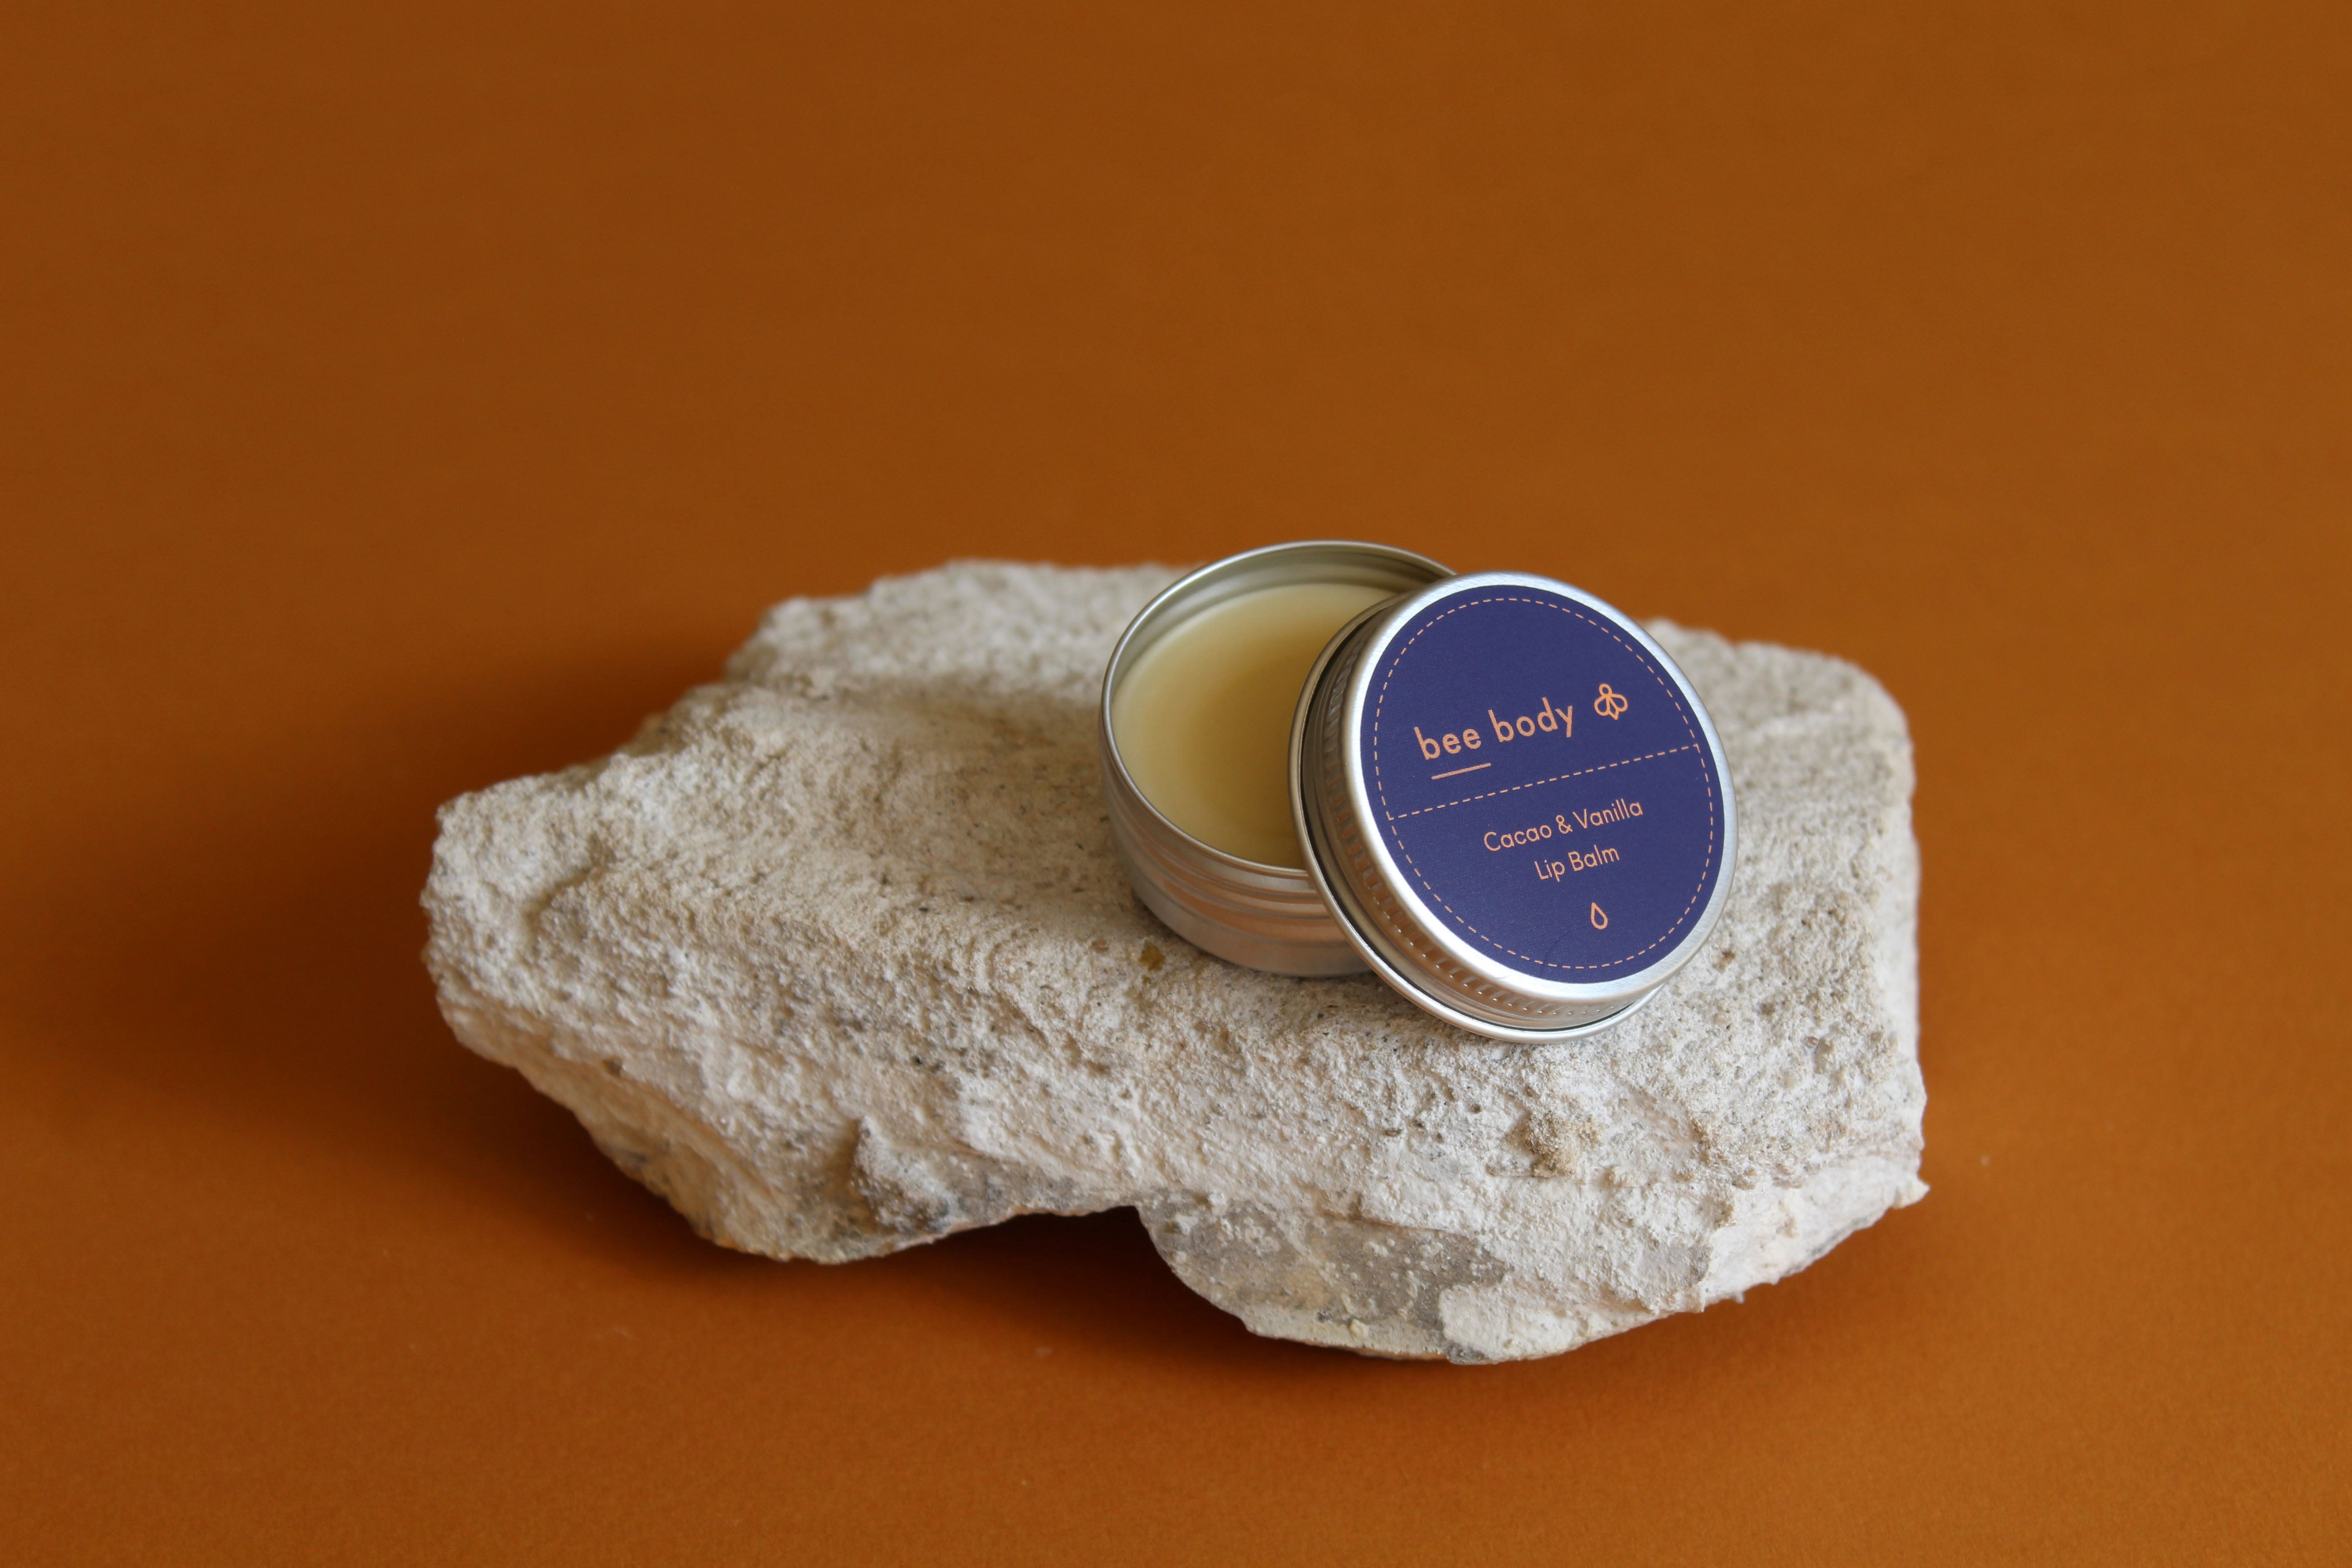 Cacao & Vanilla Lip Balm: Nourishing blend of beeswax, honey, cacao and vanilla resting gracefully on a natural rock with the lid off. Experience the soothing benefits of our product amidst a serene honey-coloured backdrop.